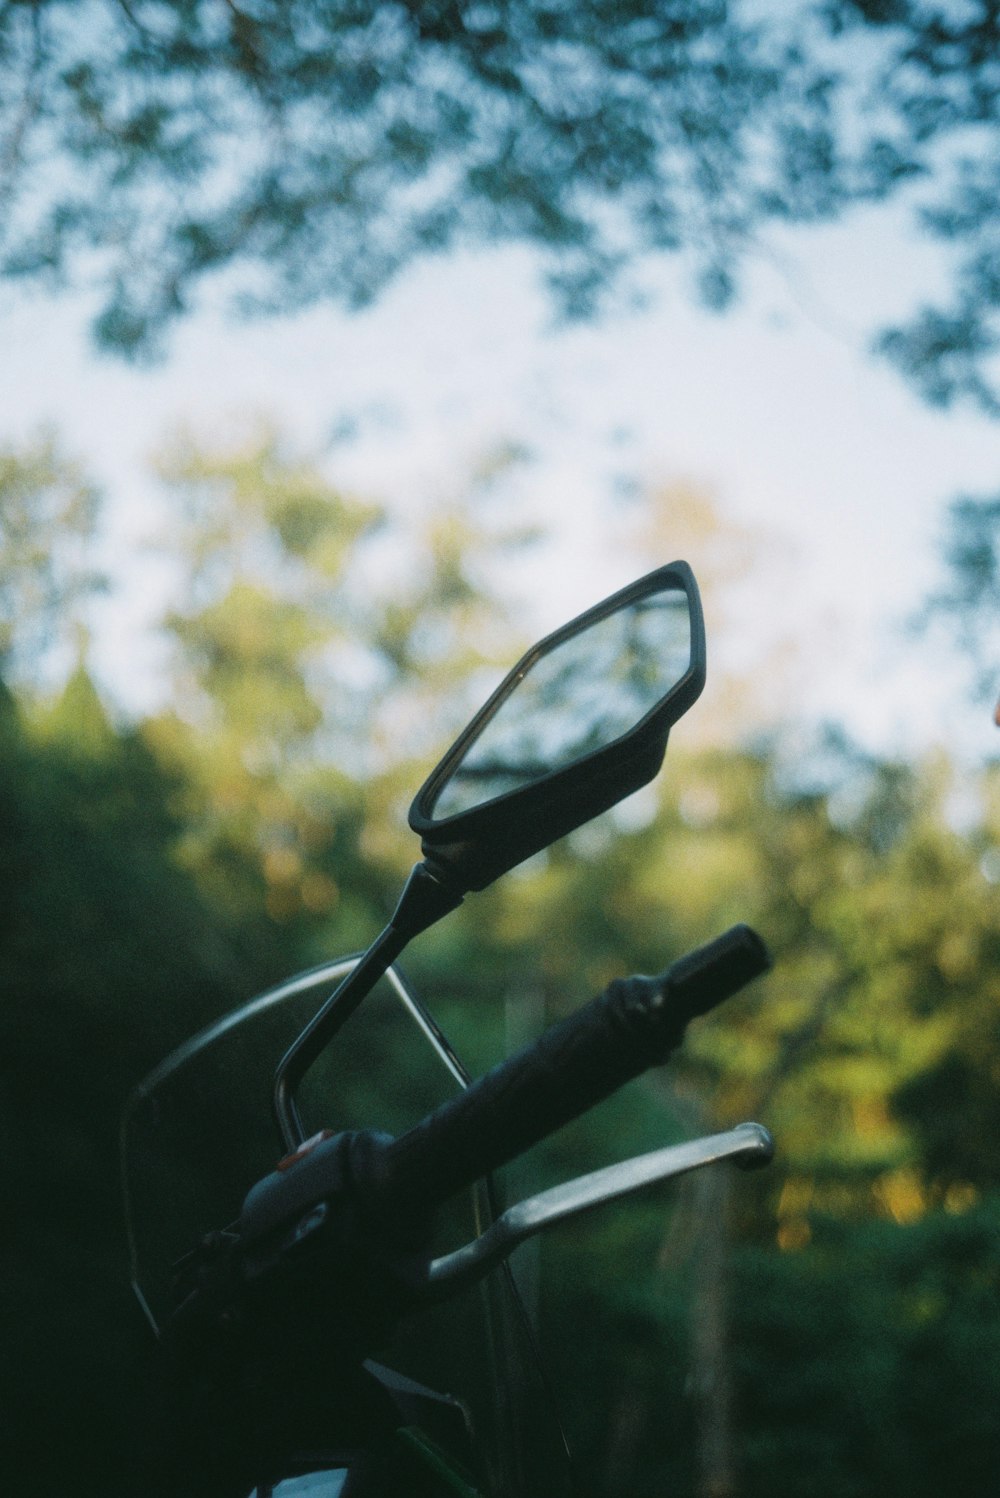 a close up of a motorcycle mirror with trees in the background